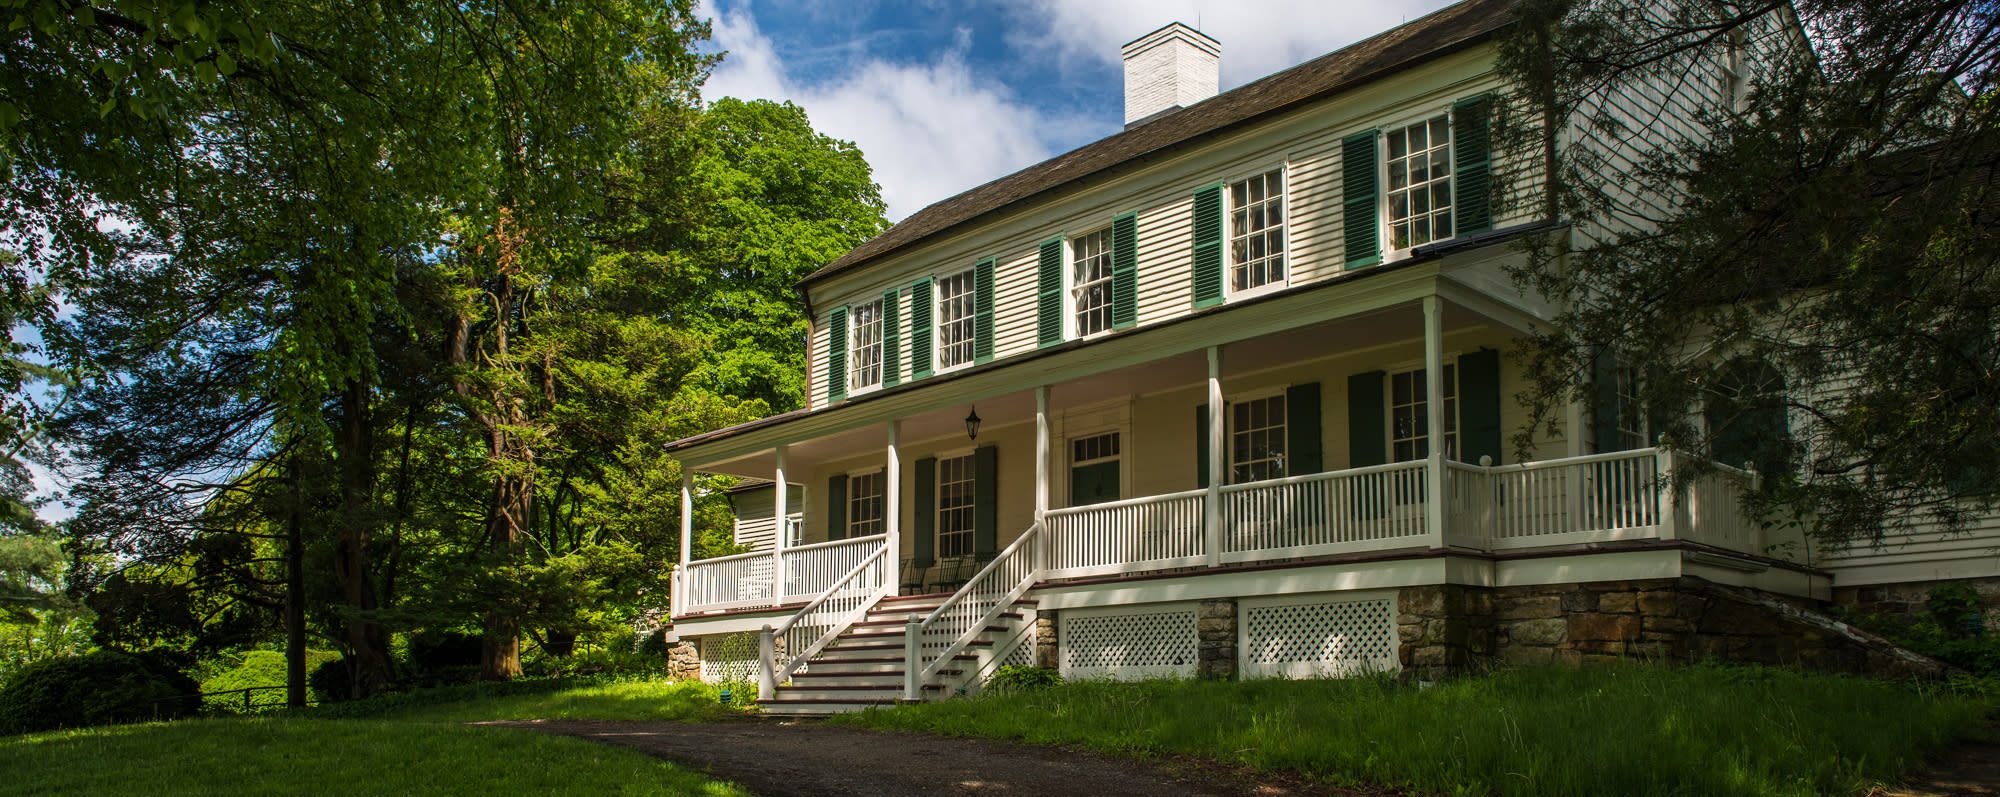 The exterior of John Jay Homestead State Historical Site on a sunny day with green foliage